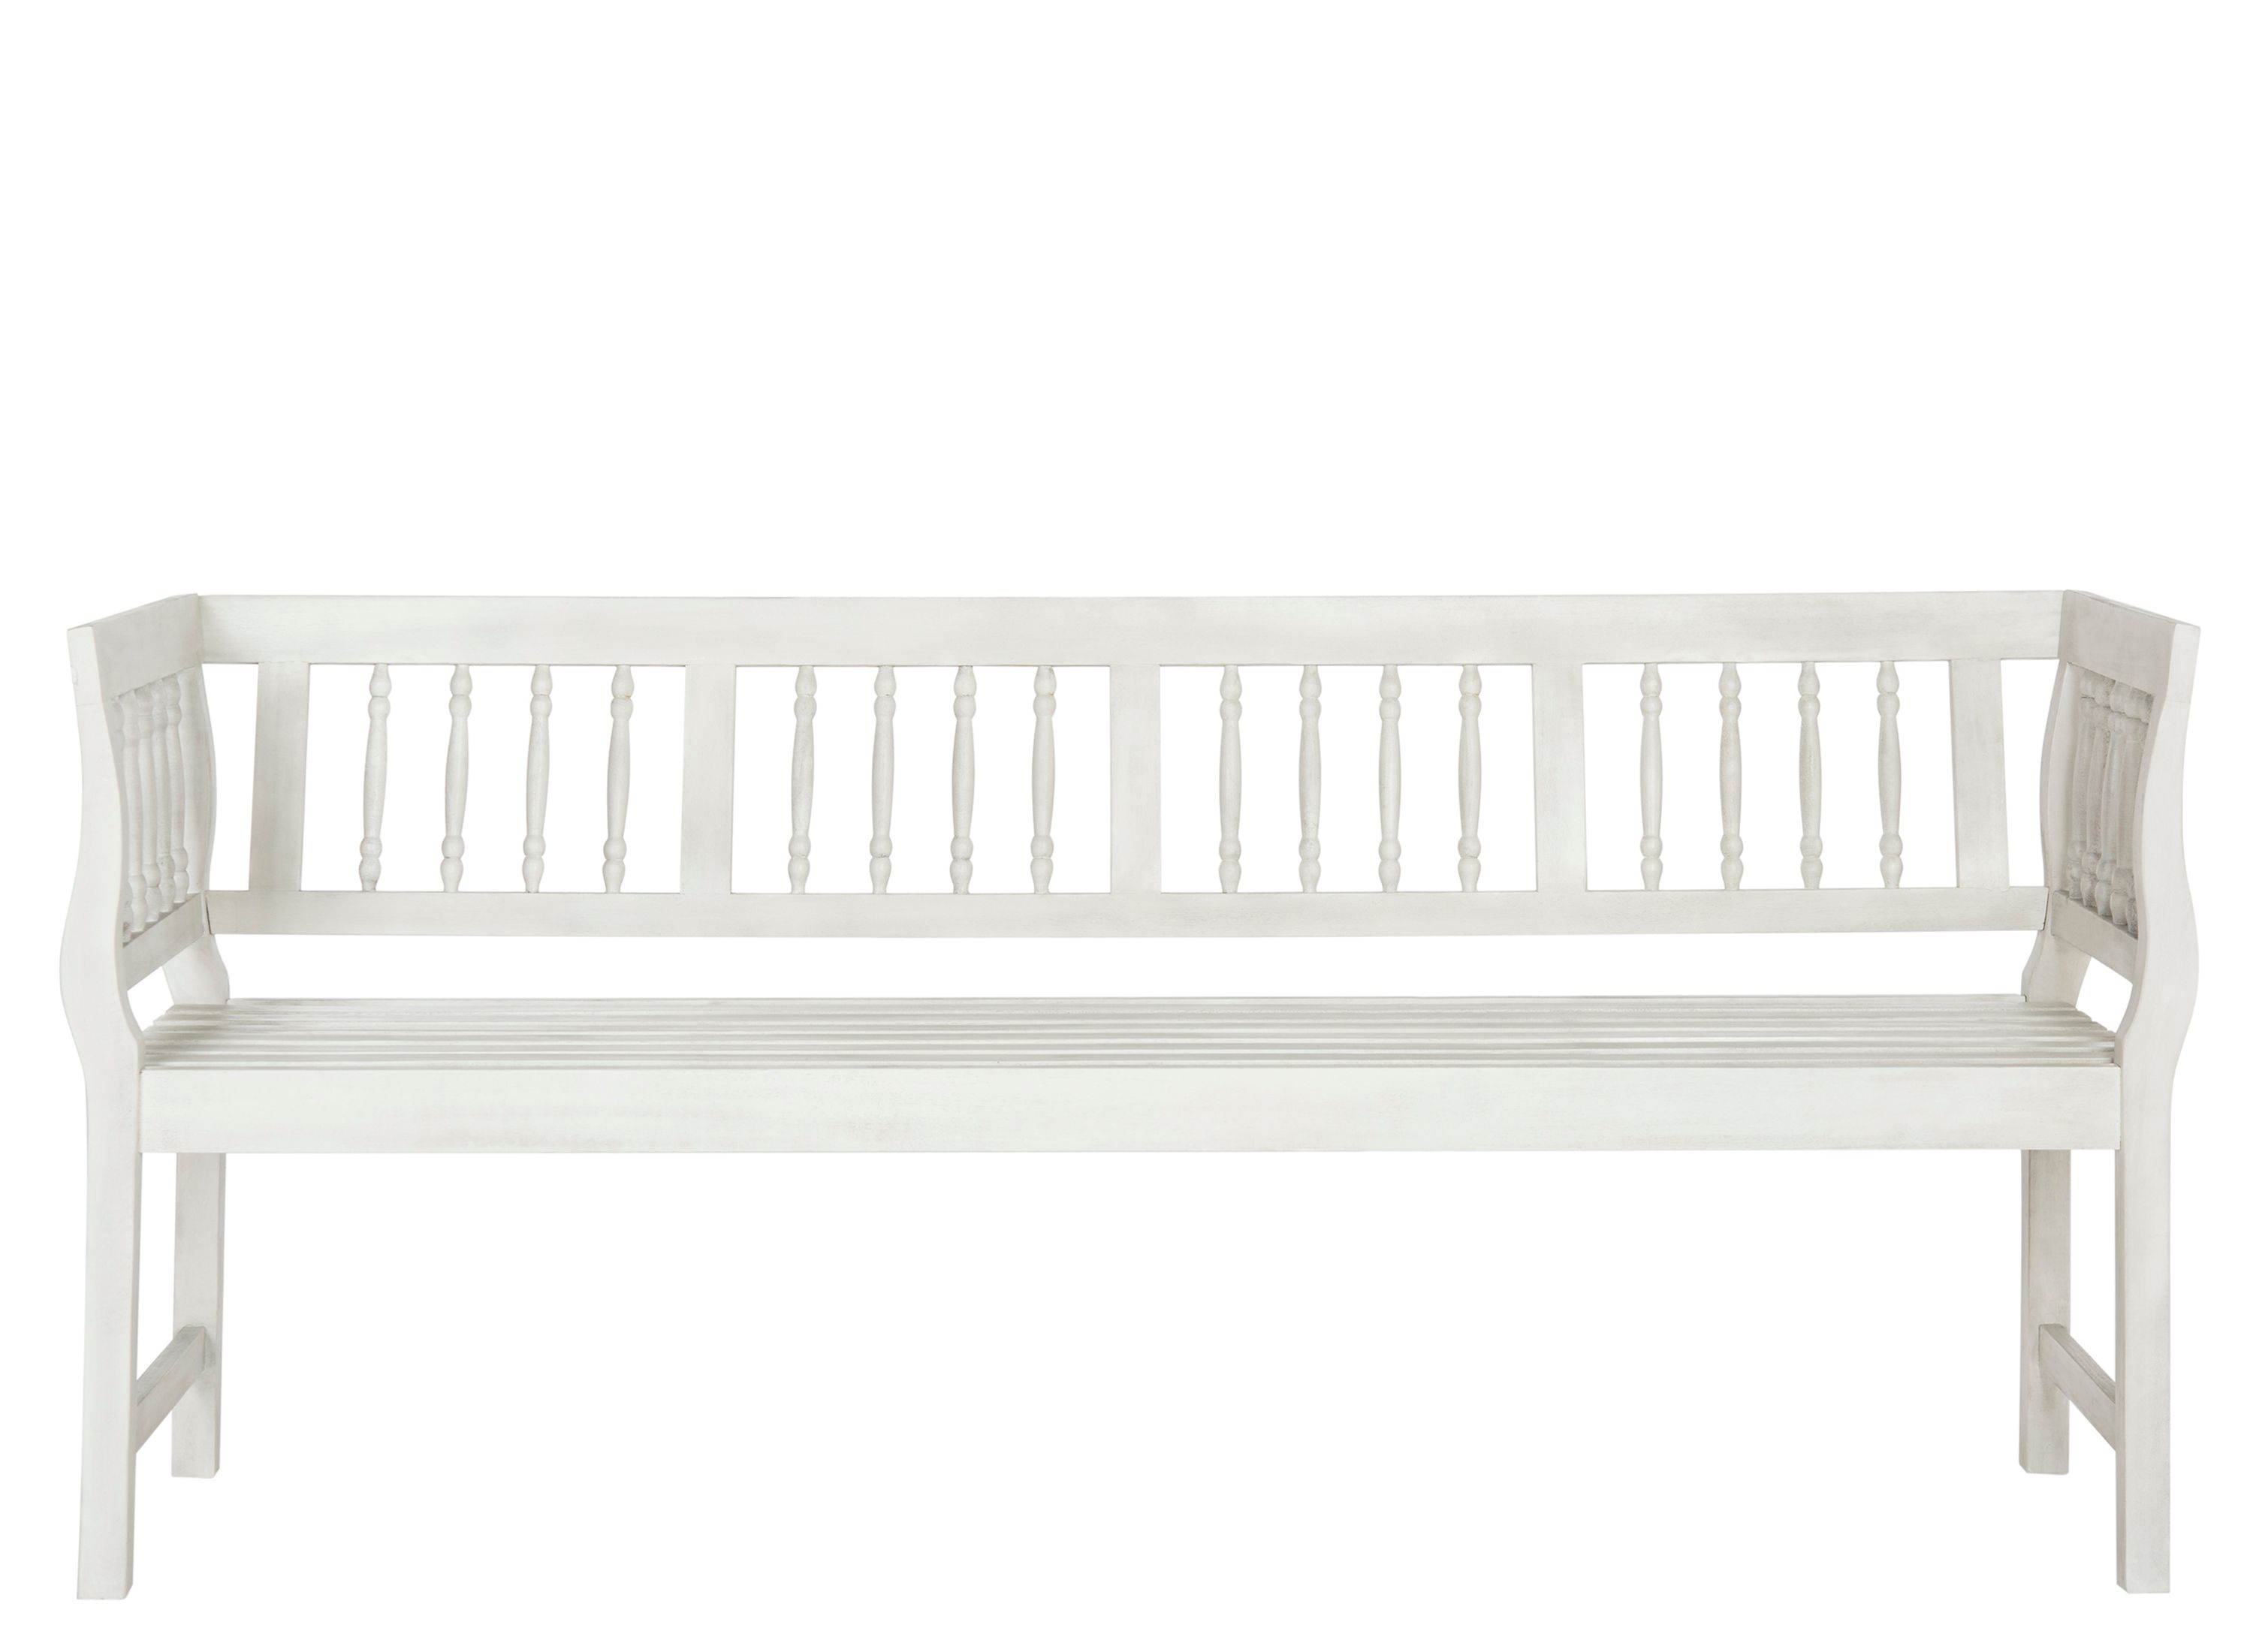 Ainslee Outdoor Bench | Raymour & Flanigan